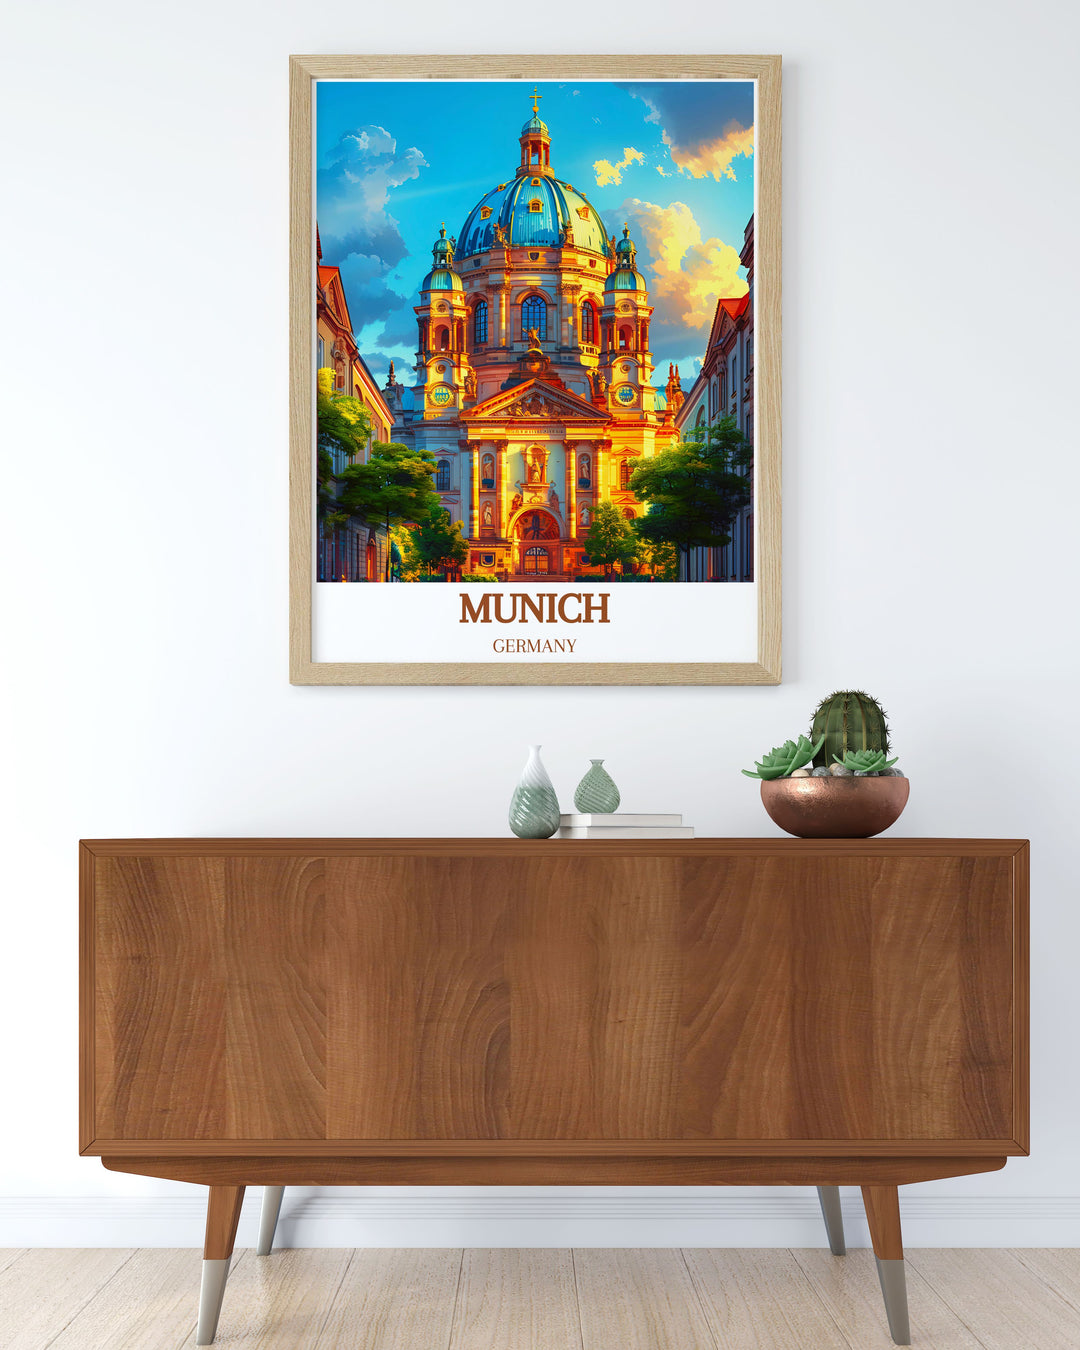 Elegant Munich Wall Art capturing the essence of GERMANY Frauenkirche Dresden architectural splendor and historical significance beautiful addition to any room perfect for travel enthusiasts Germany Photography lovers and those seeking unique home decor pieces